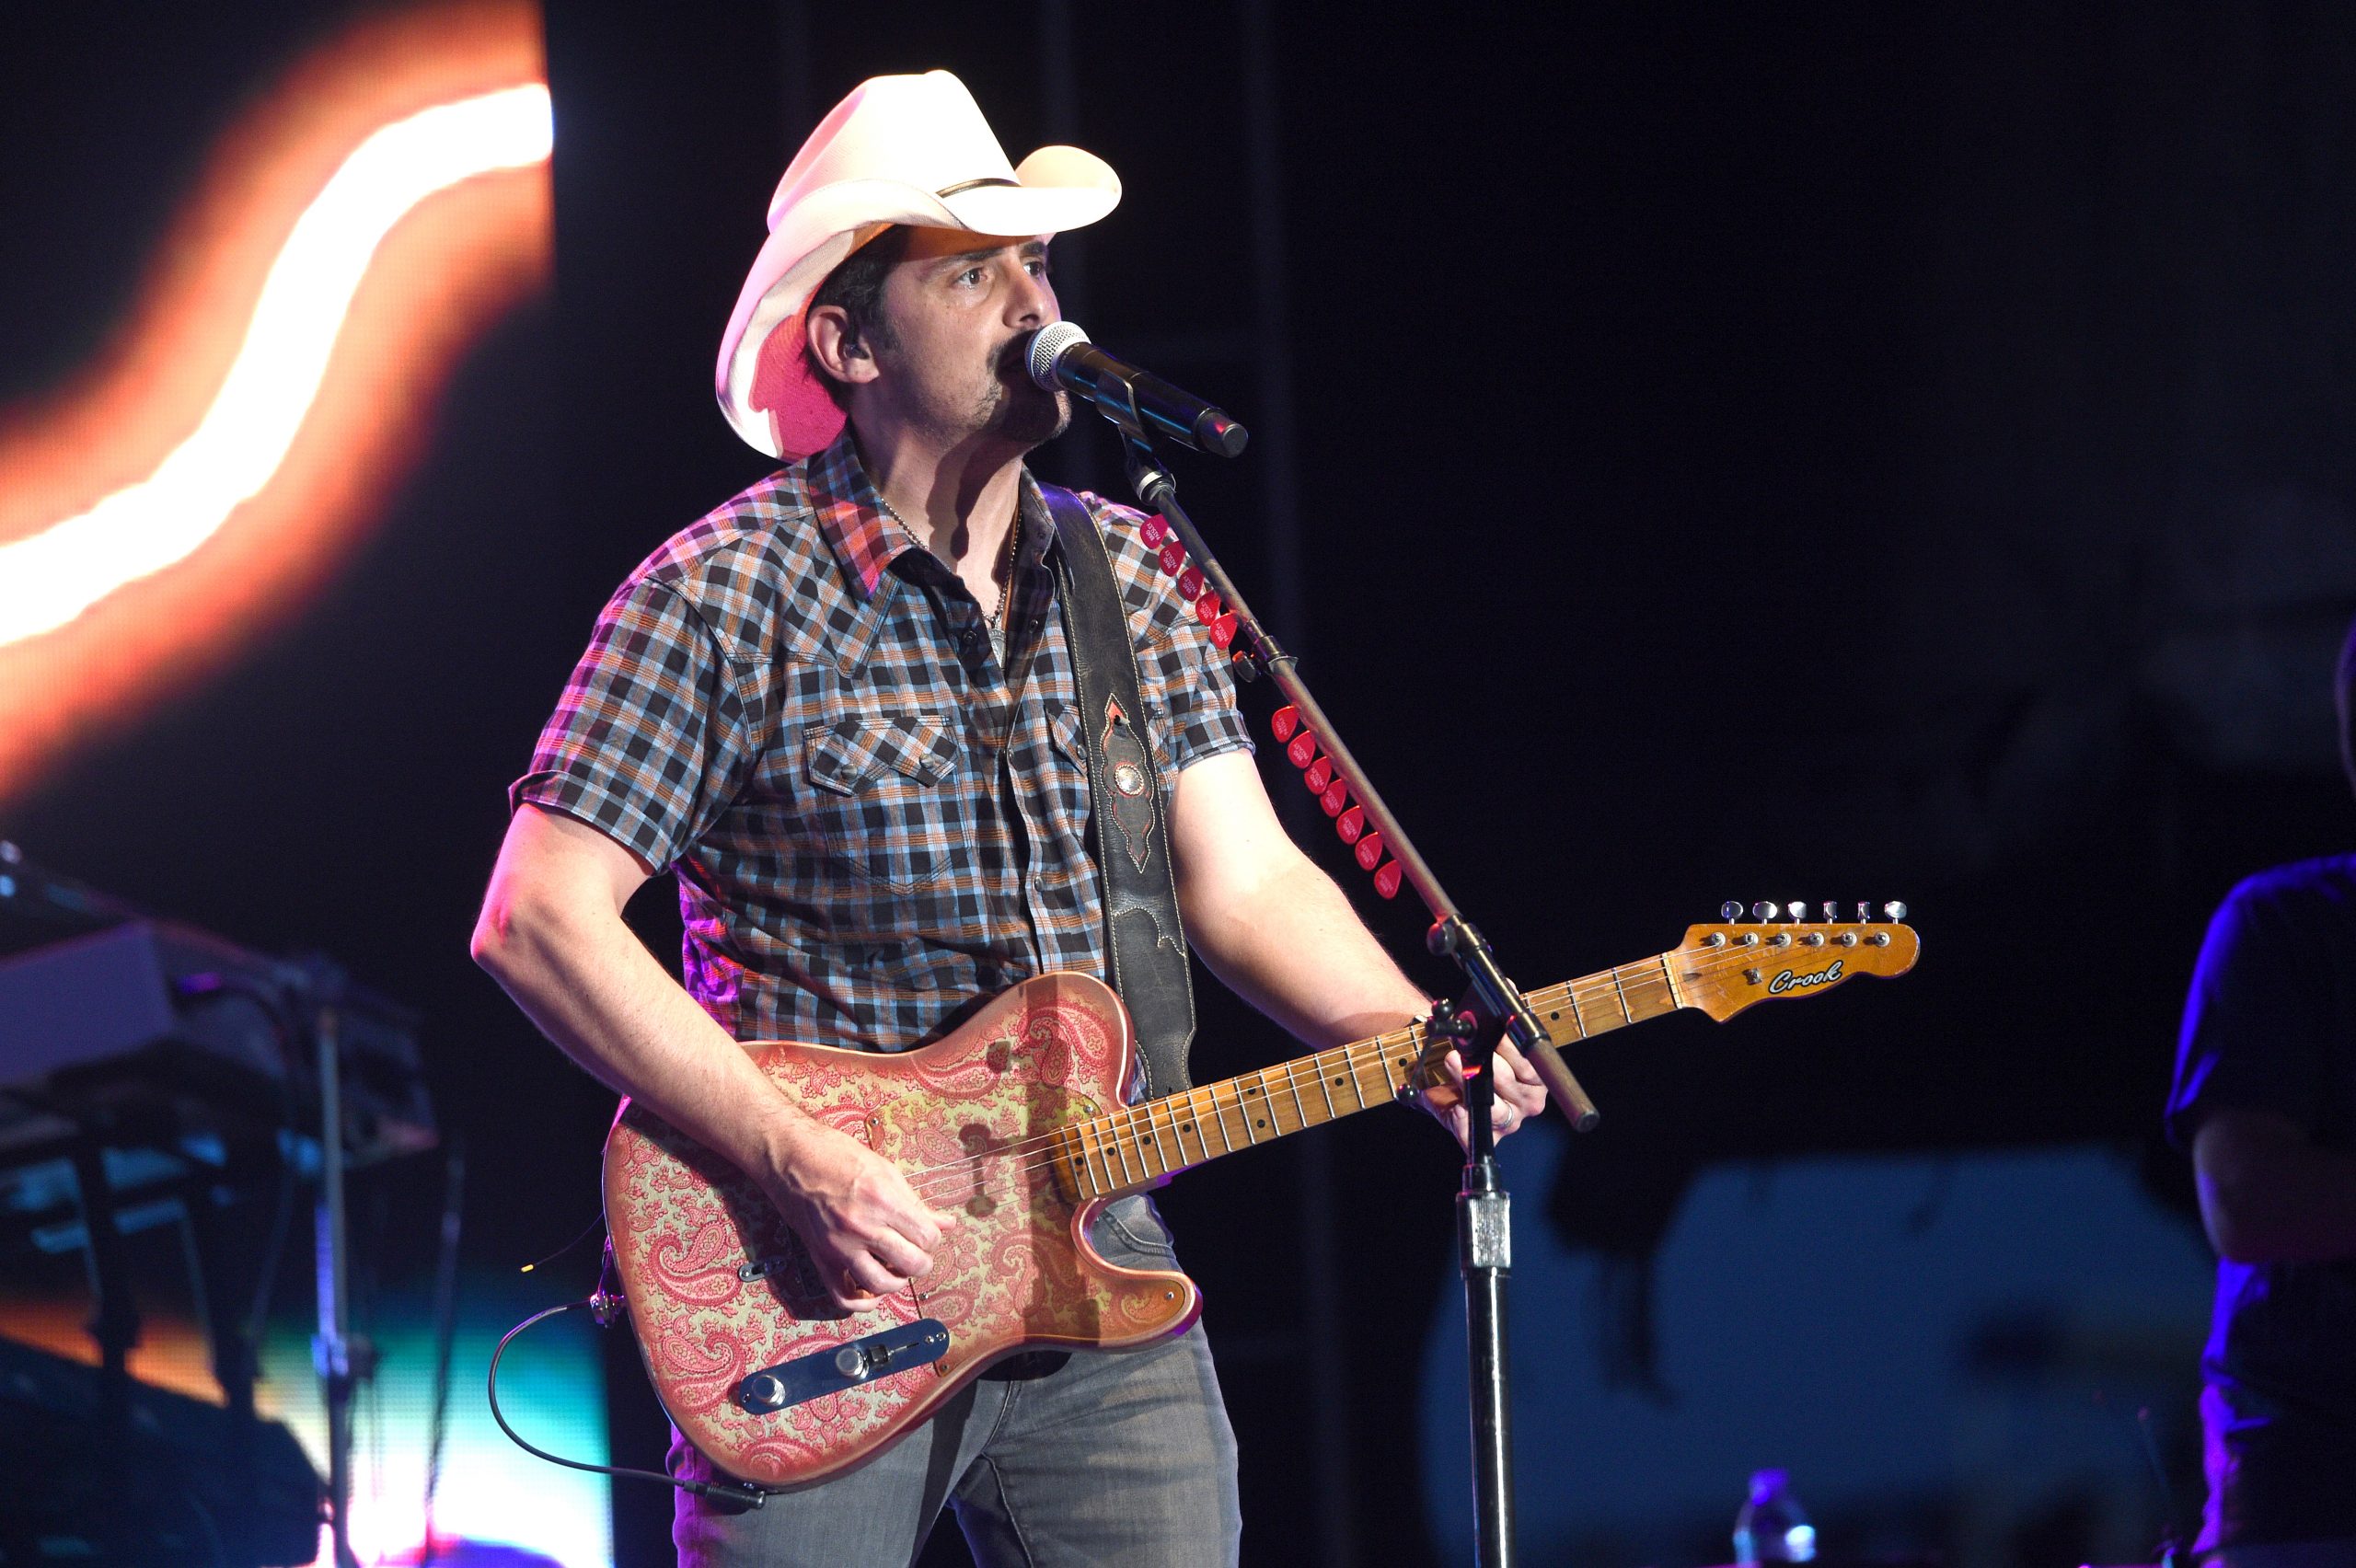 MARYLAND HEIGHTS, MISSOURI - JULY 10:   Brad Paisley performs at Live Nation’s first ever U.S. dr...